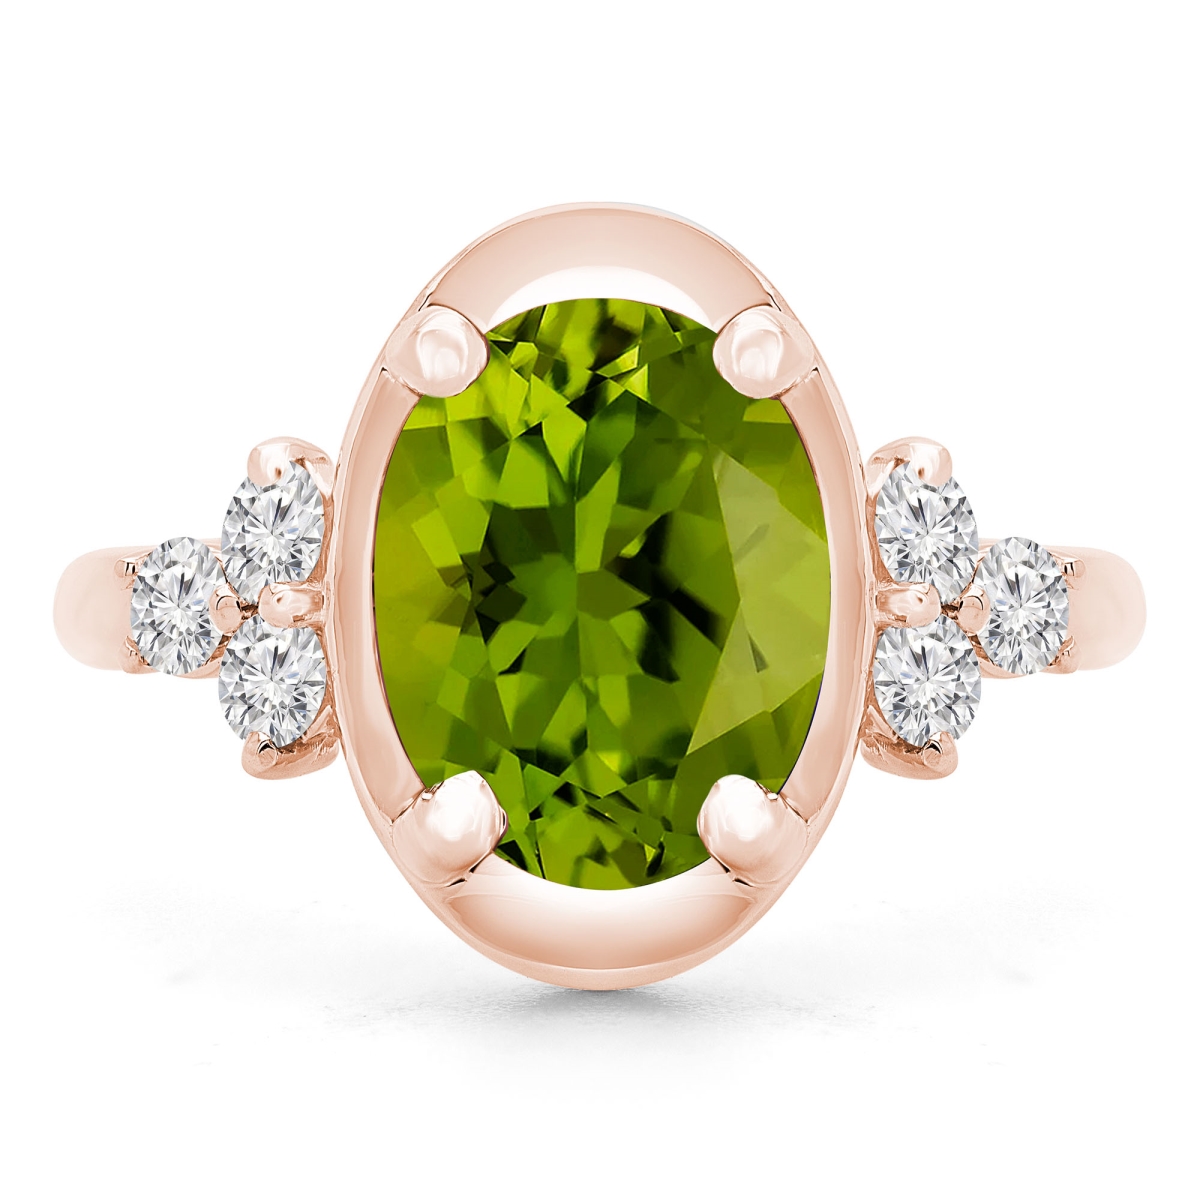 Picture of Majesty Diamonds MD190412-6.5 3.9 CTW Oval Green Peridot Cocktail Ring in 14K Rose Gold - Size 6.5